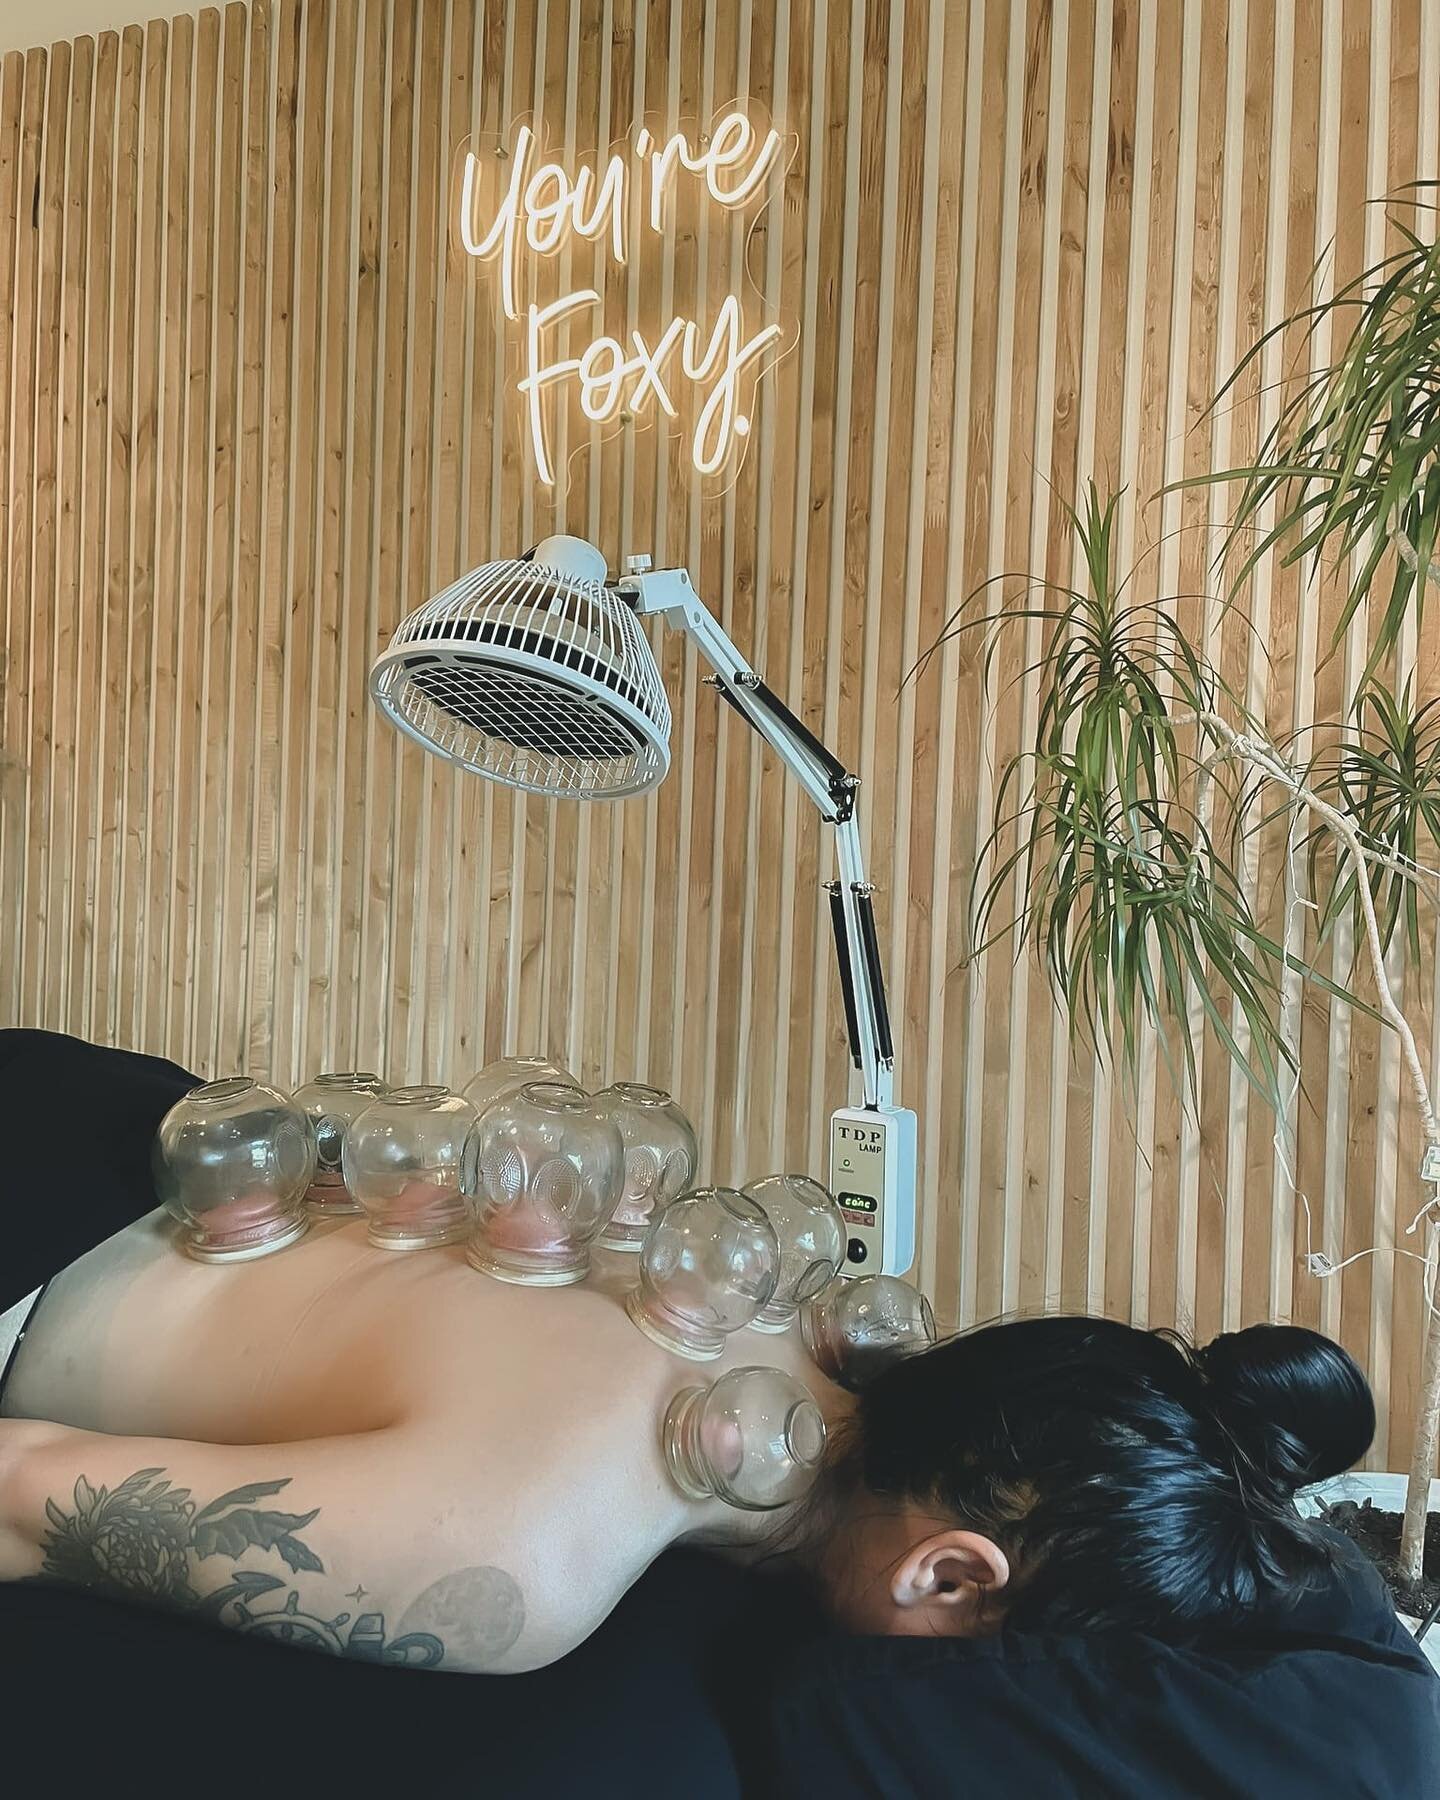 Acupuncture + Cupping + Sarga Bodywork + Sound healing = One deluxe treatment for this beautiful lady today. We love layering different modalities into your treatment for a multidimensional healing session. 

#soundhealing #acupuncture #lowerlonsdale